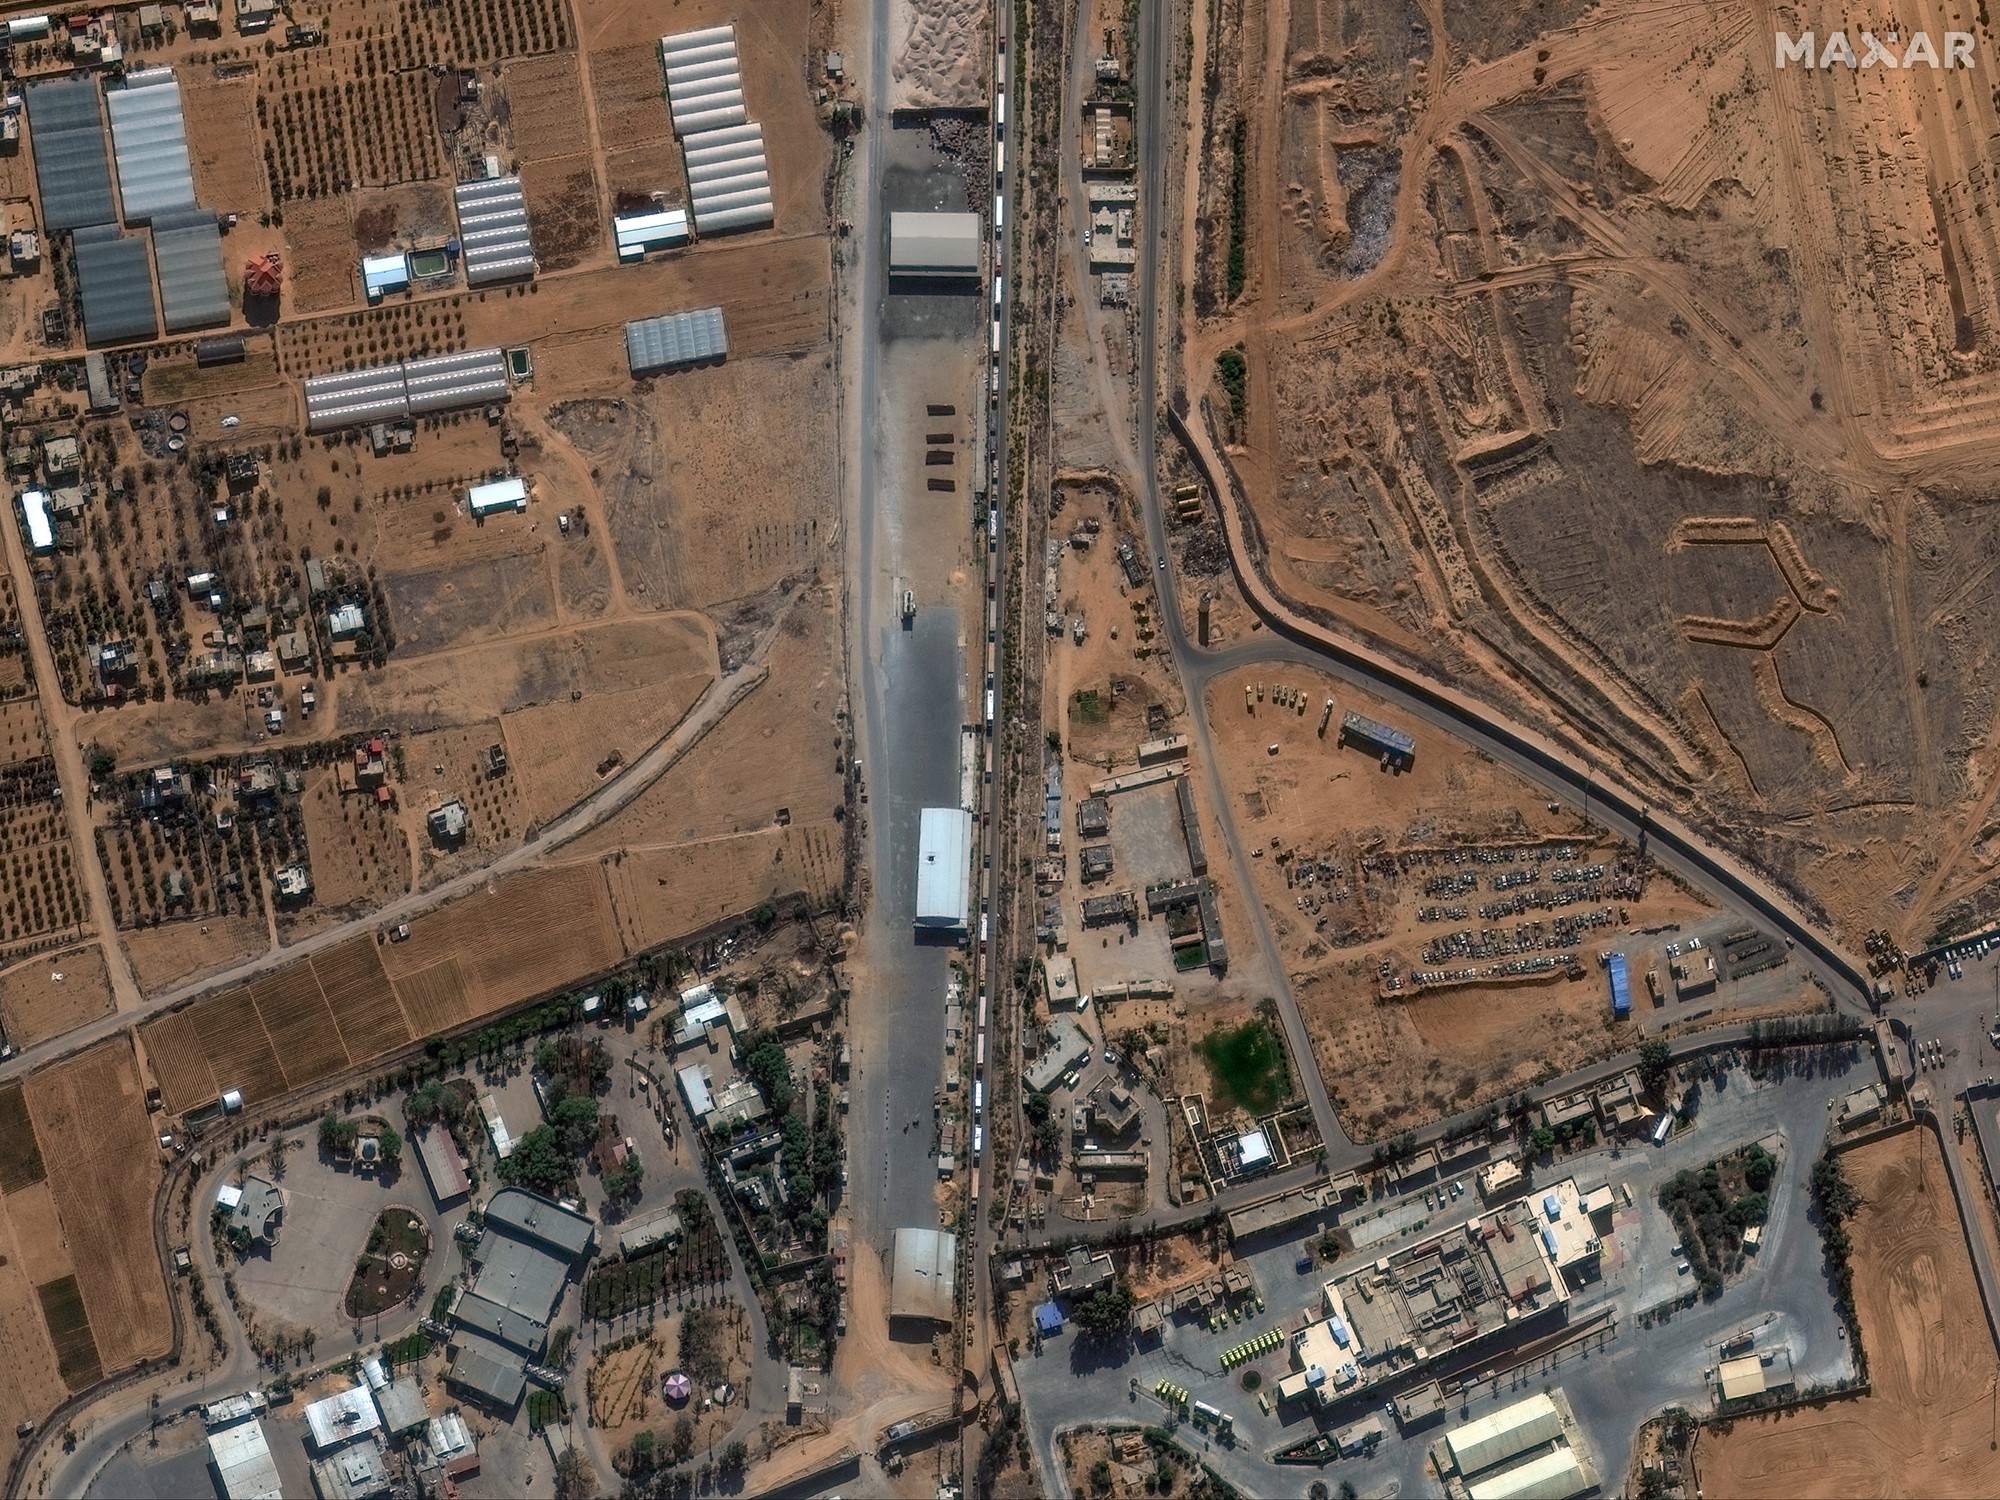 A satellite image shows a road lined with trucks, buildings and fields can be seen on either side